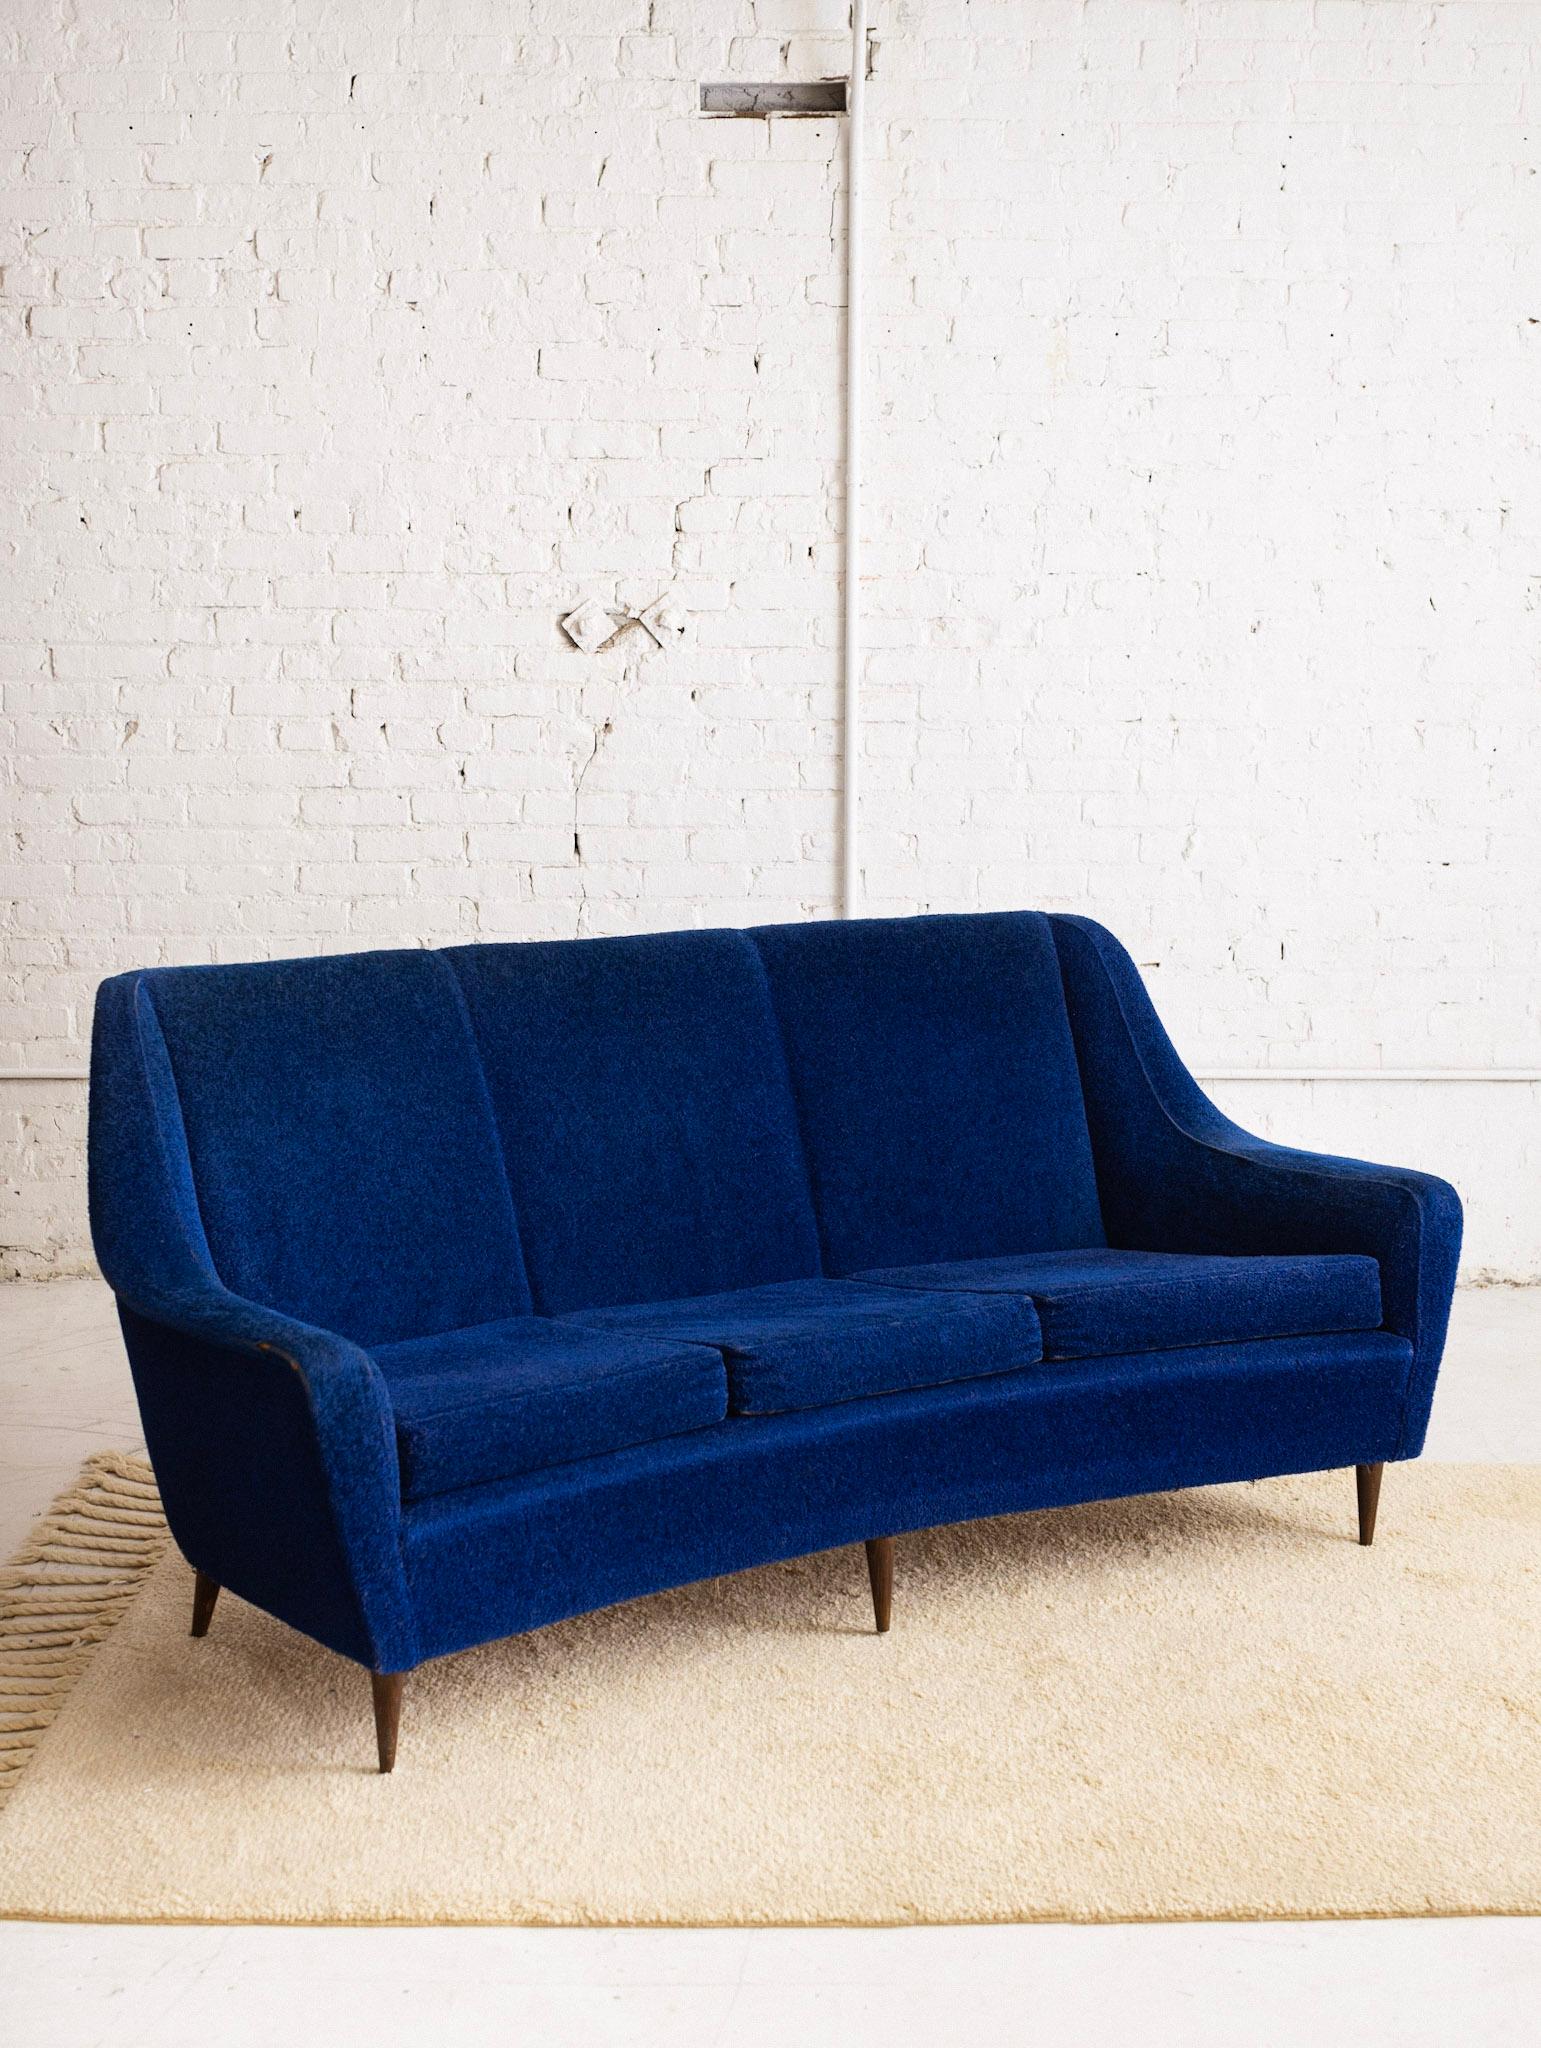 Italian Mid-Century Modern sofa in original cobalt blue boucle. Reversible floral pattern on seat cushions. Curved back. Tapered wood feet. Sourced in Northern Italy. This piece is recommended for reupholstery.